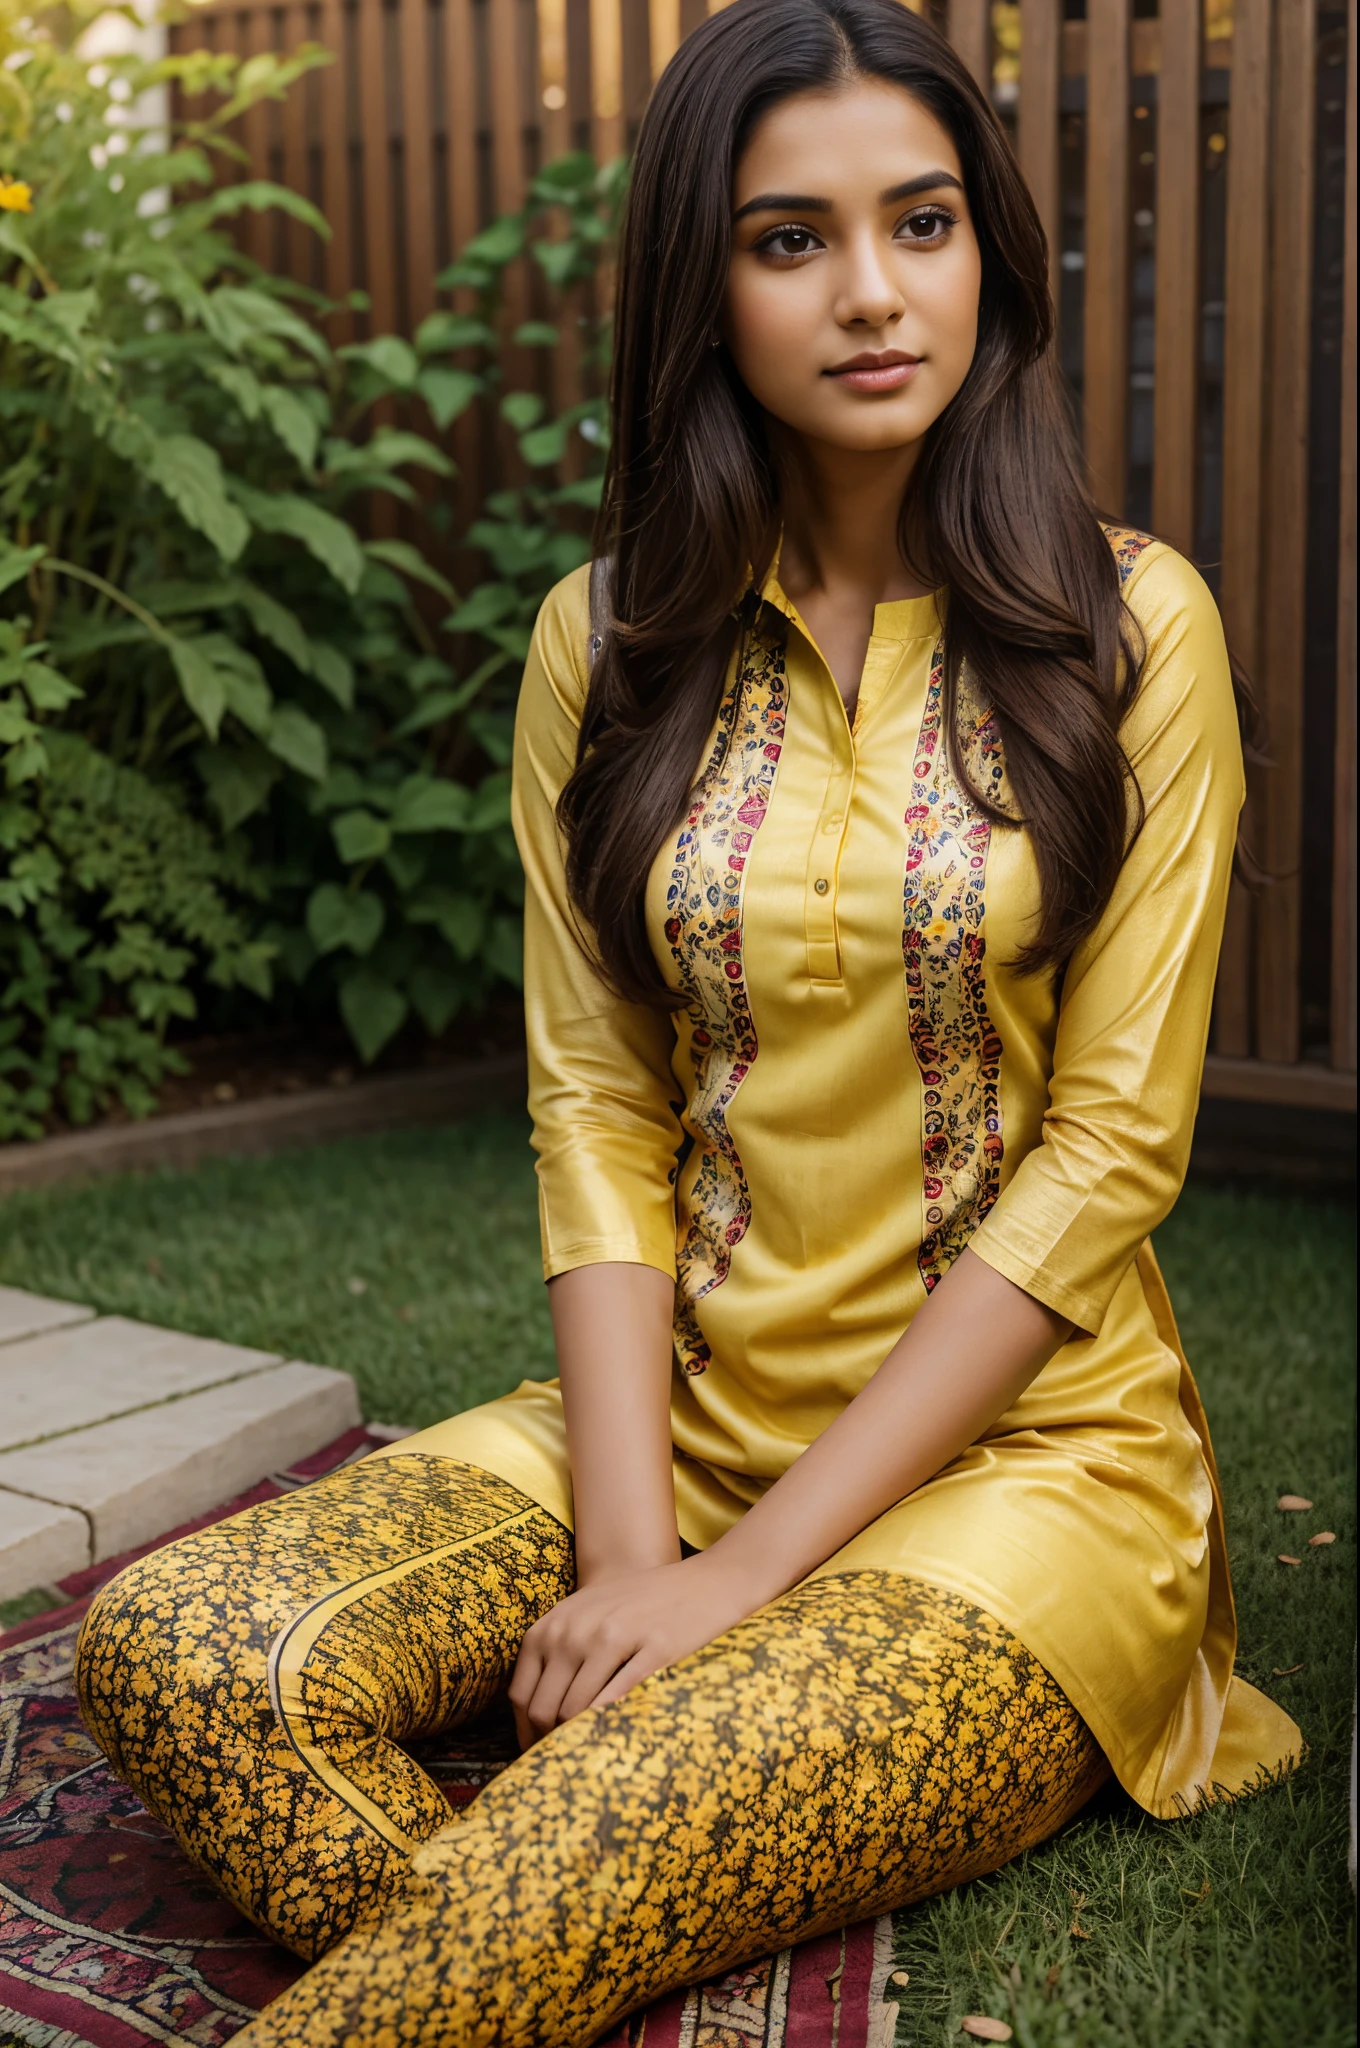 Beautiful ,23 years young girl healthy,confident looking,8k,realistic,dark brown hair,fair skin, indian,long hair,clear facial features, wearing Mustard printed kurta with leggings, sitting on lawn, Outdoor garden